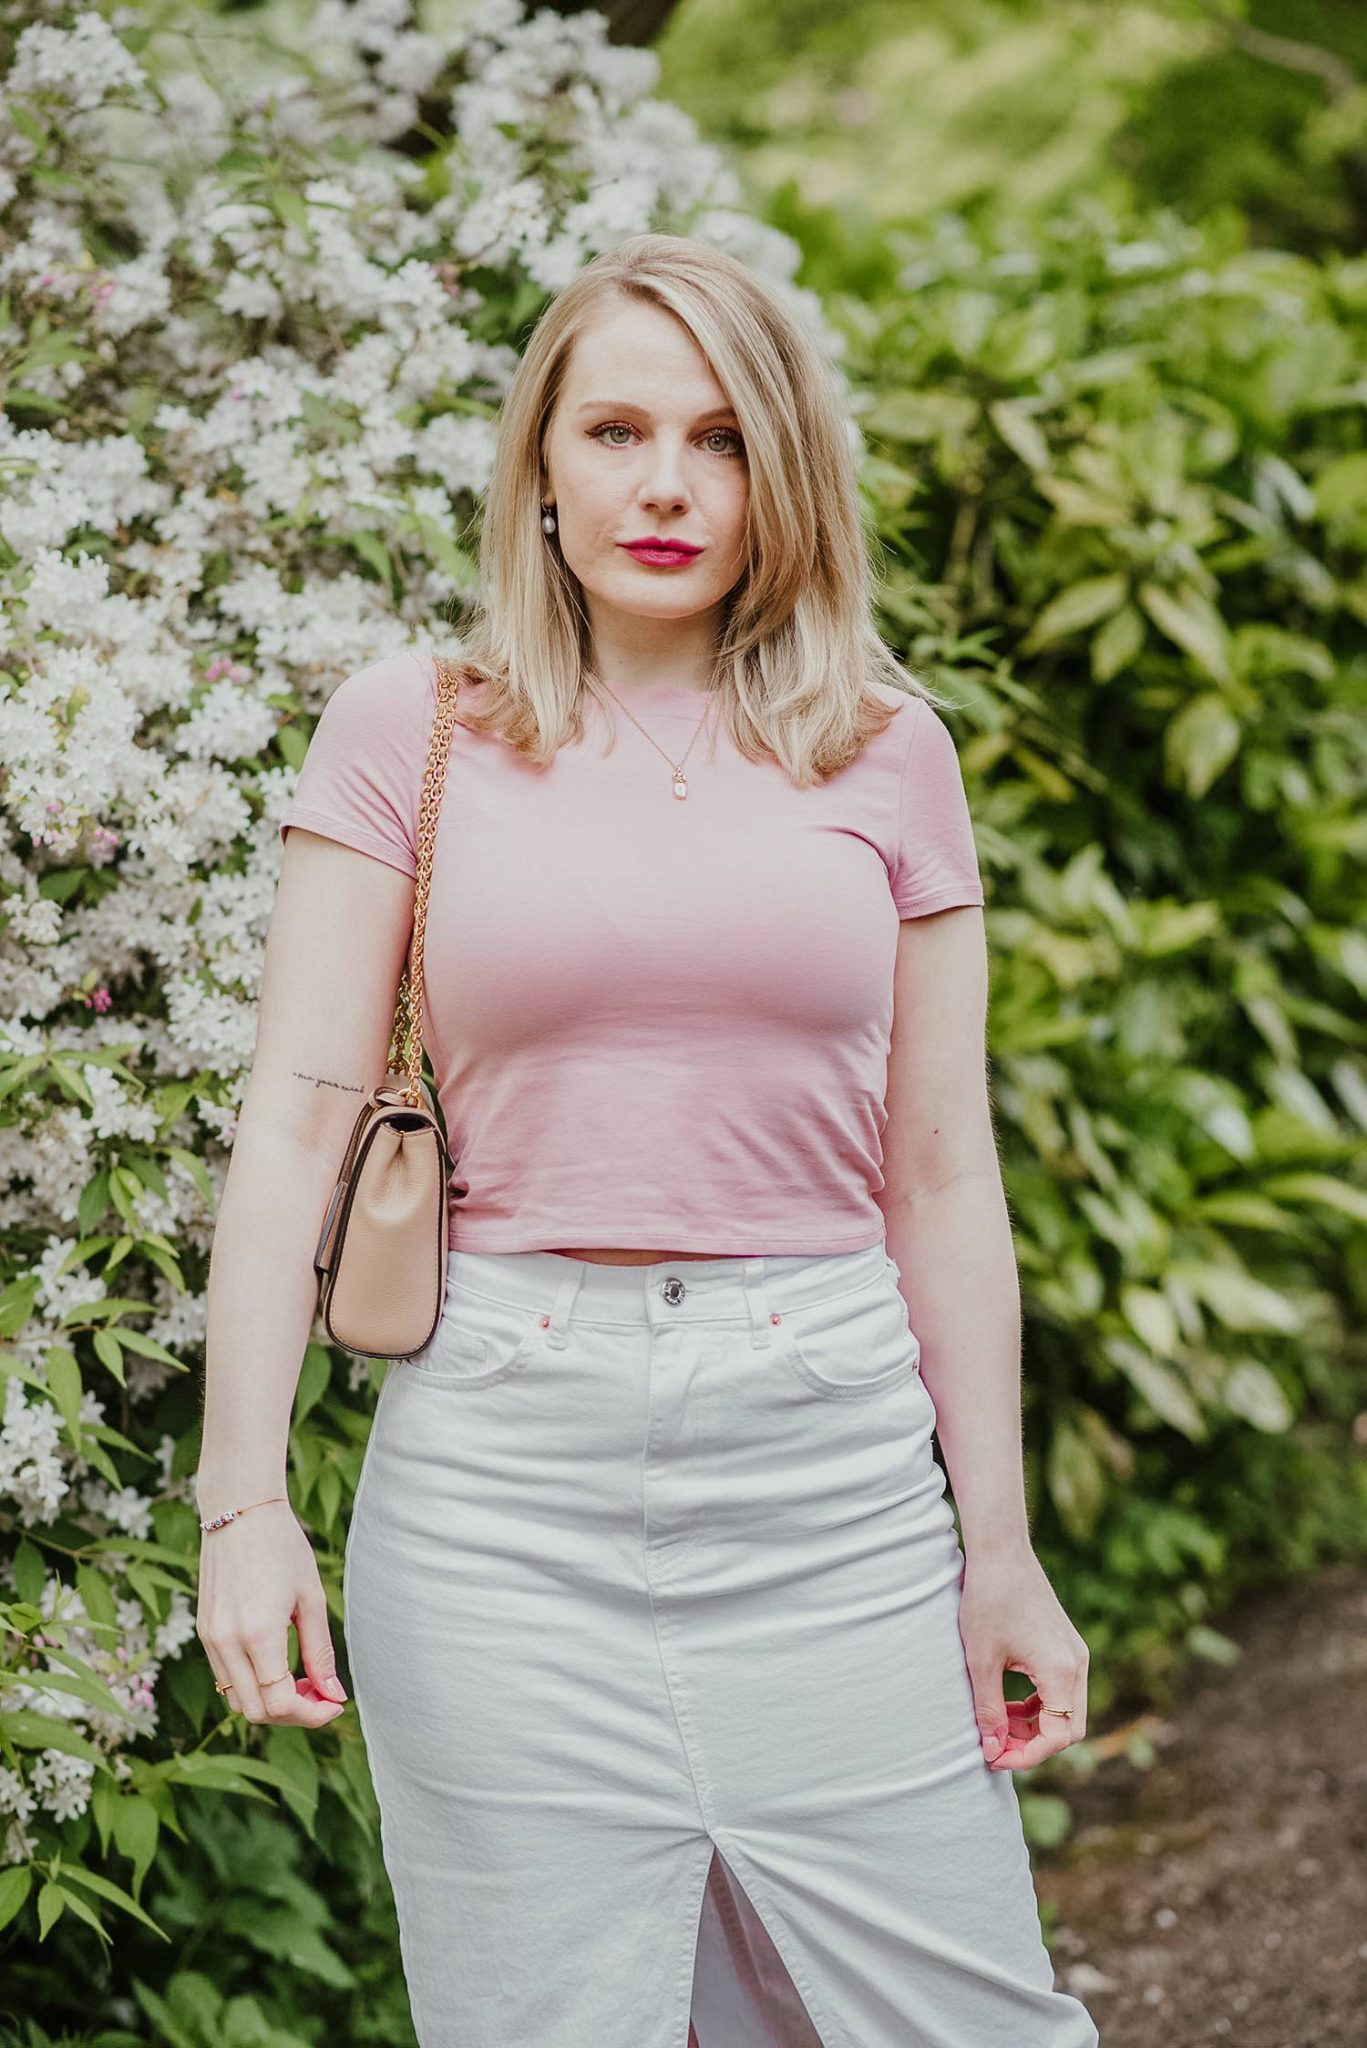 A White Denim Midi Skirt And Pink Baby Tee - FORD LA FEMME